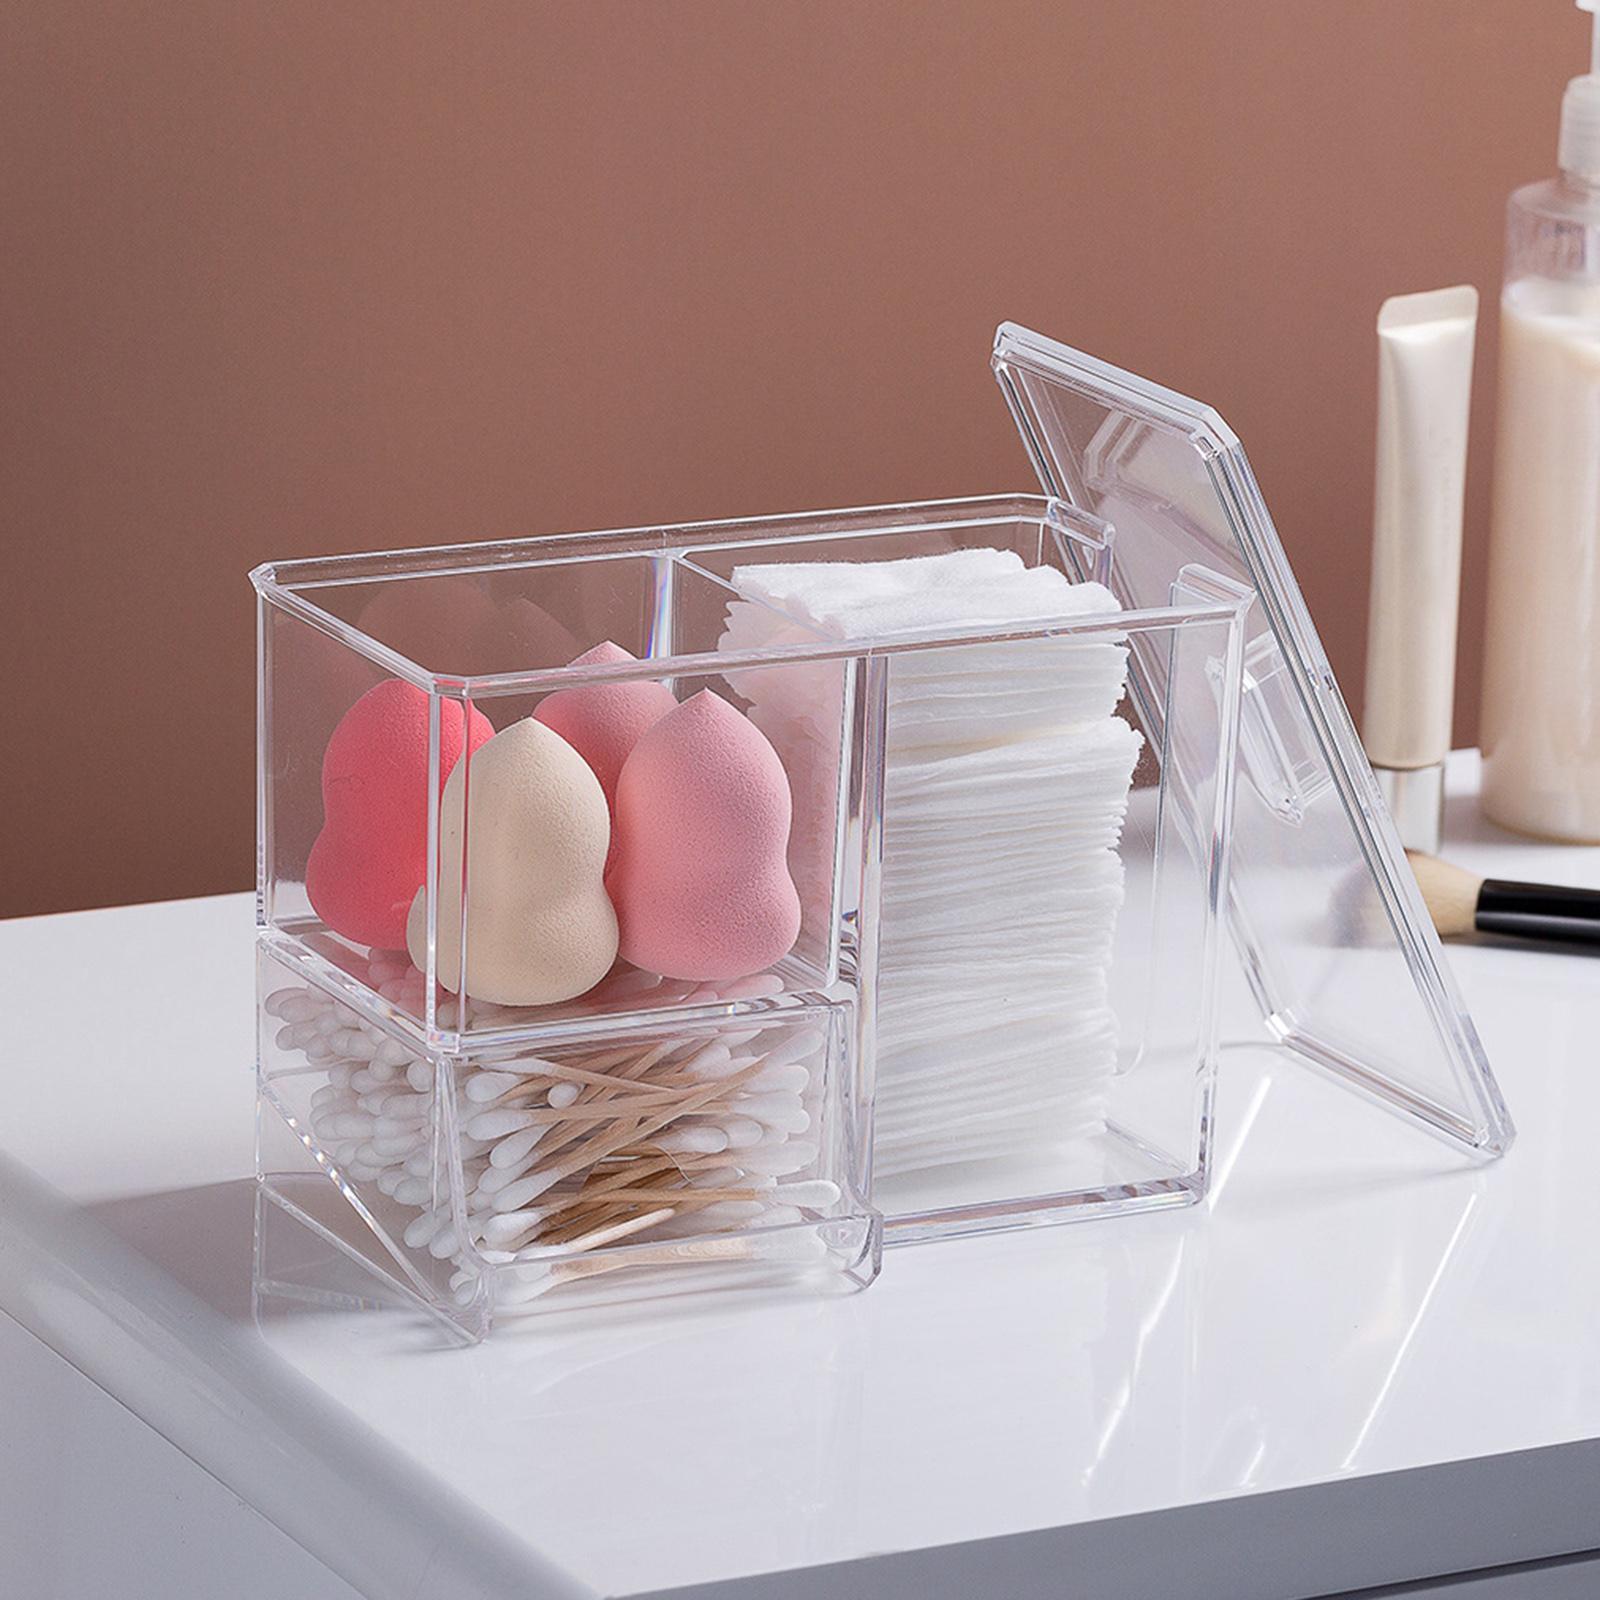 Holder, Vanity Organizers Swab Balls Box Container Tool Dispenser with Lid for Storage